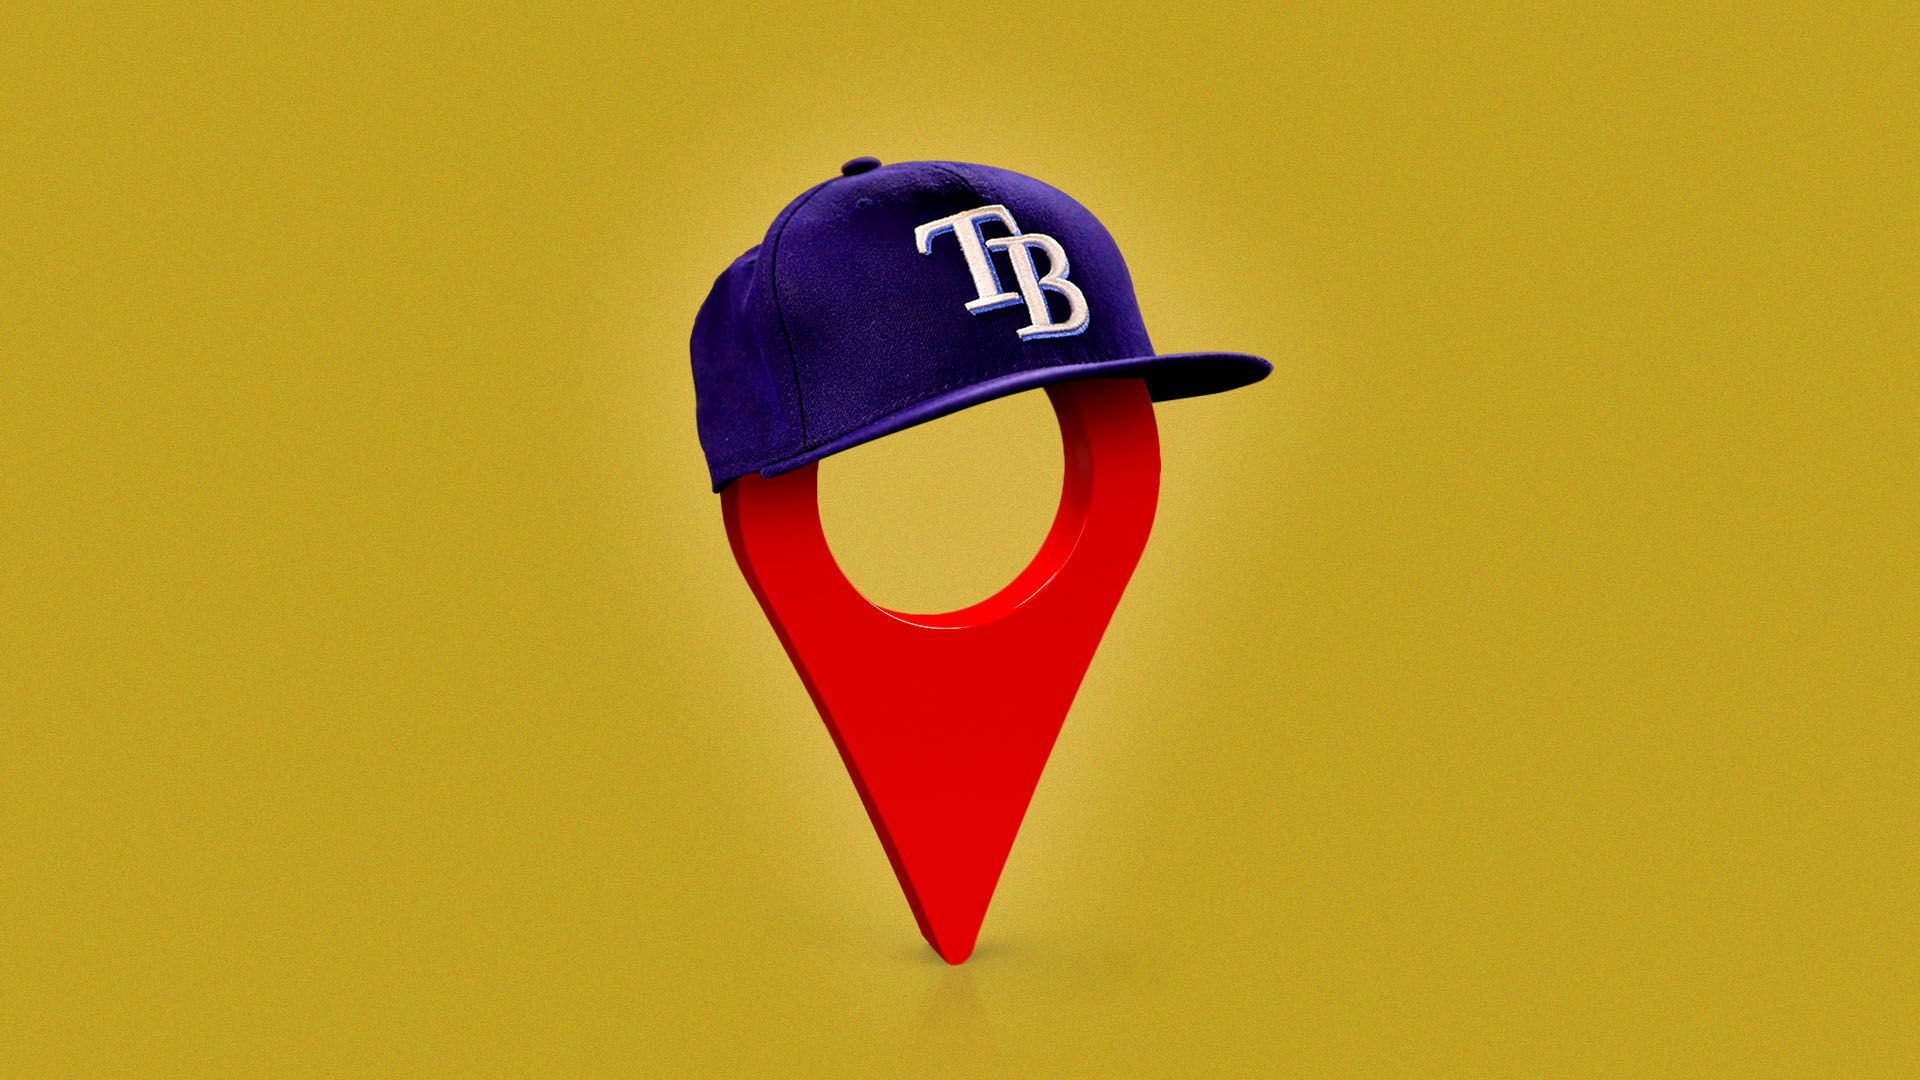 Illustration of a location pin wearing a Tampa Bay Rays baseball hat.